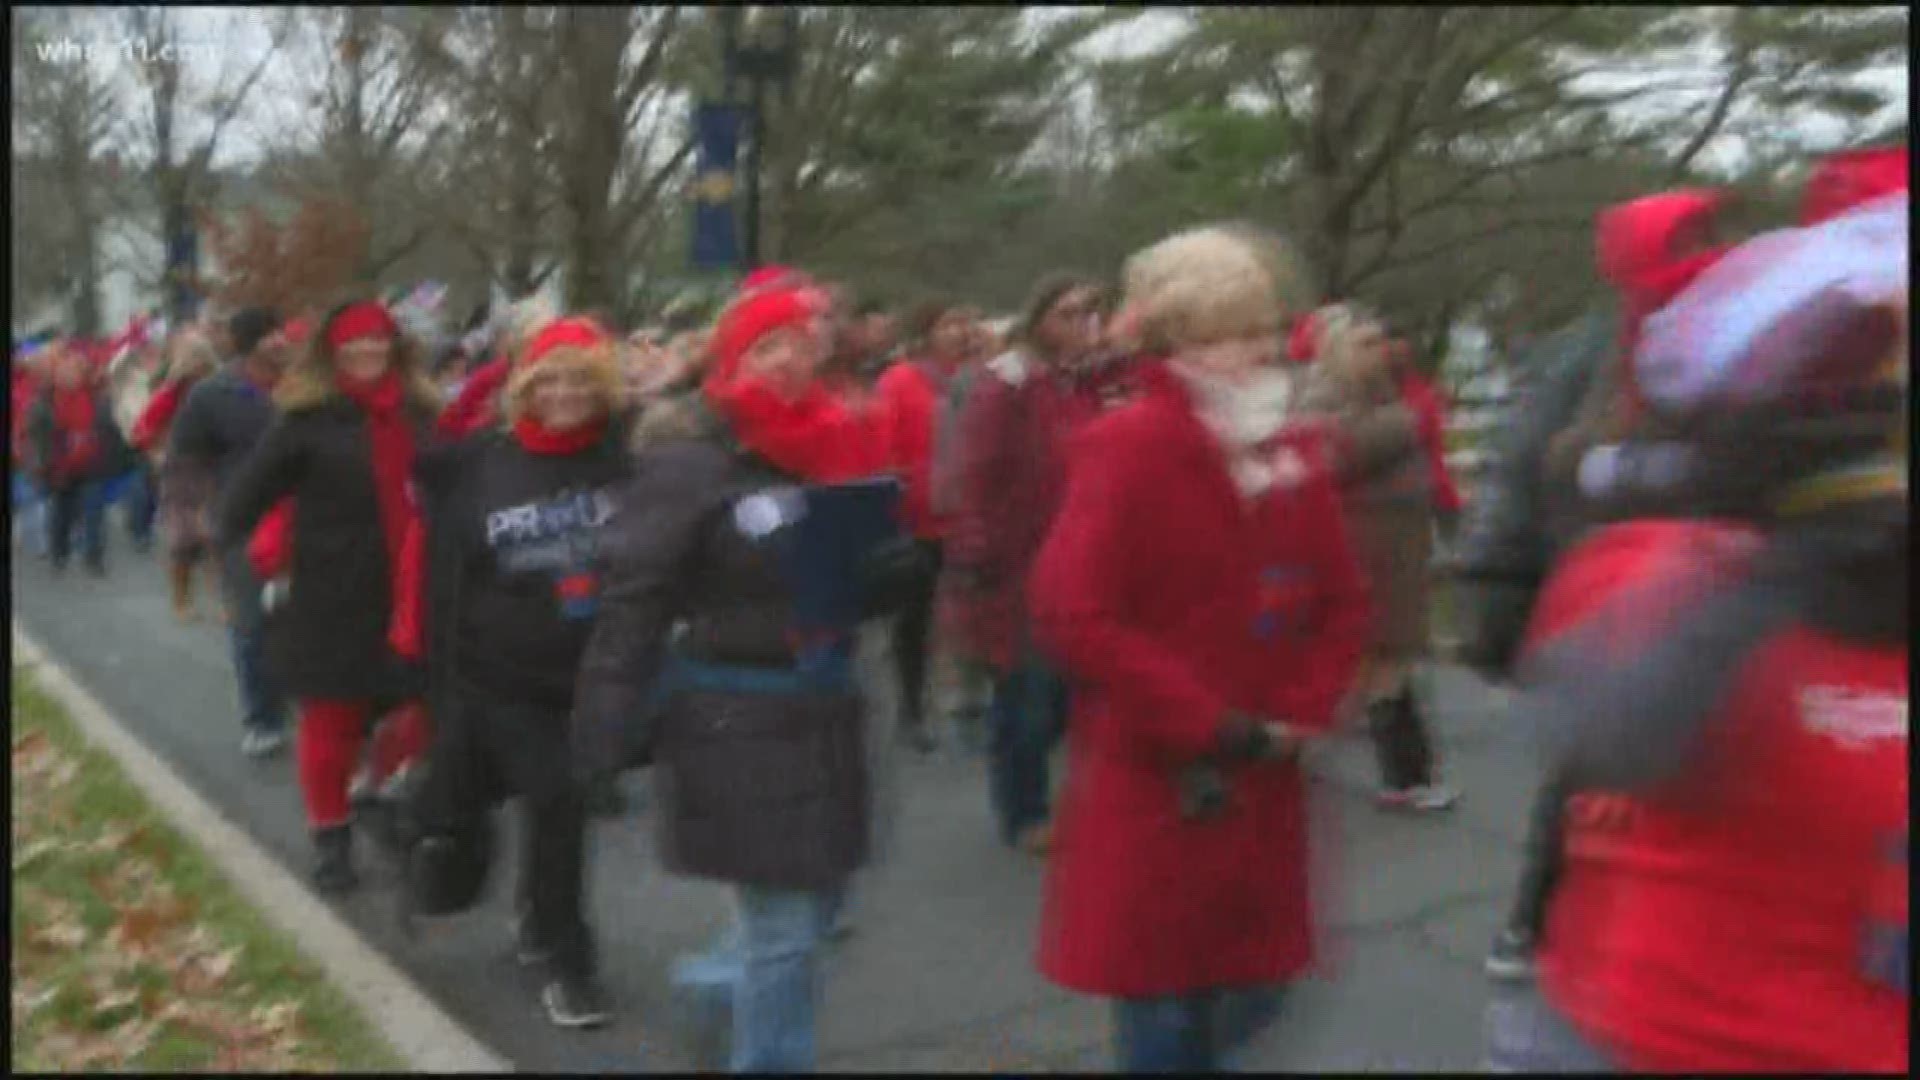 Teachers lined the street and led the parade as part of the new governors inauguration